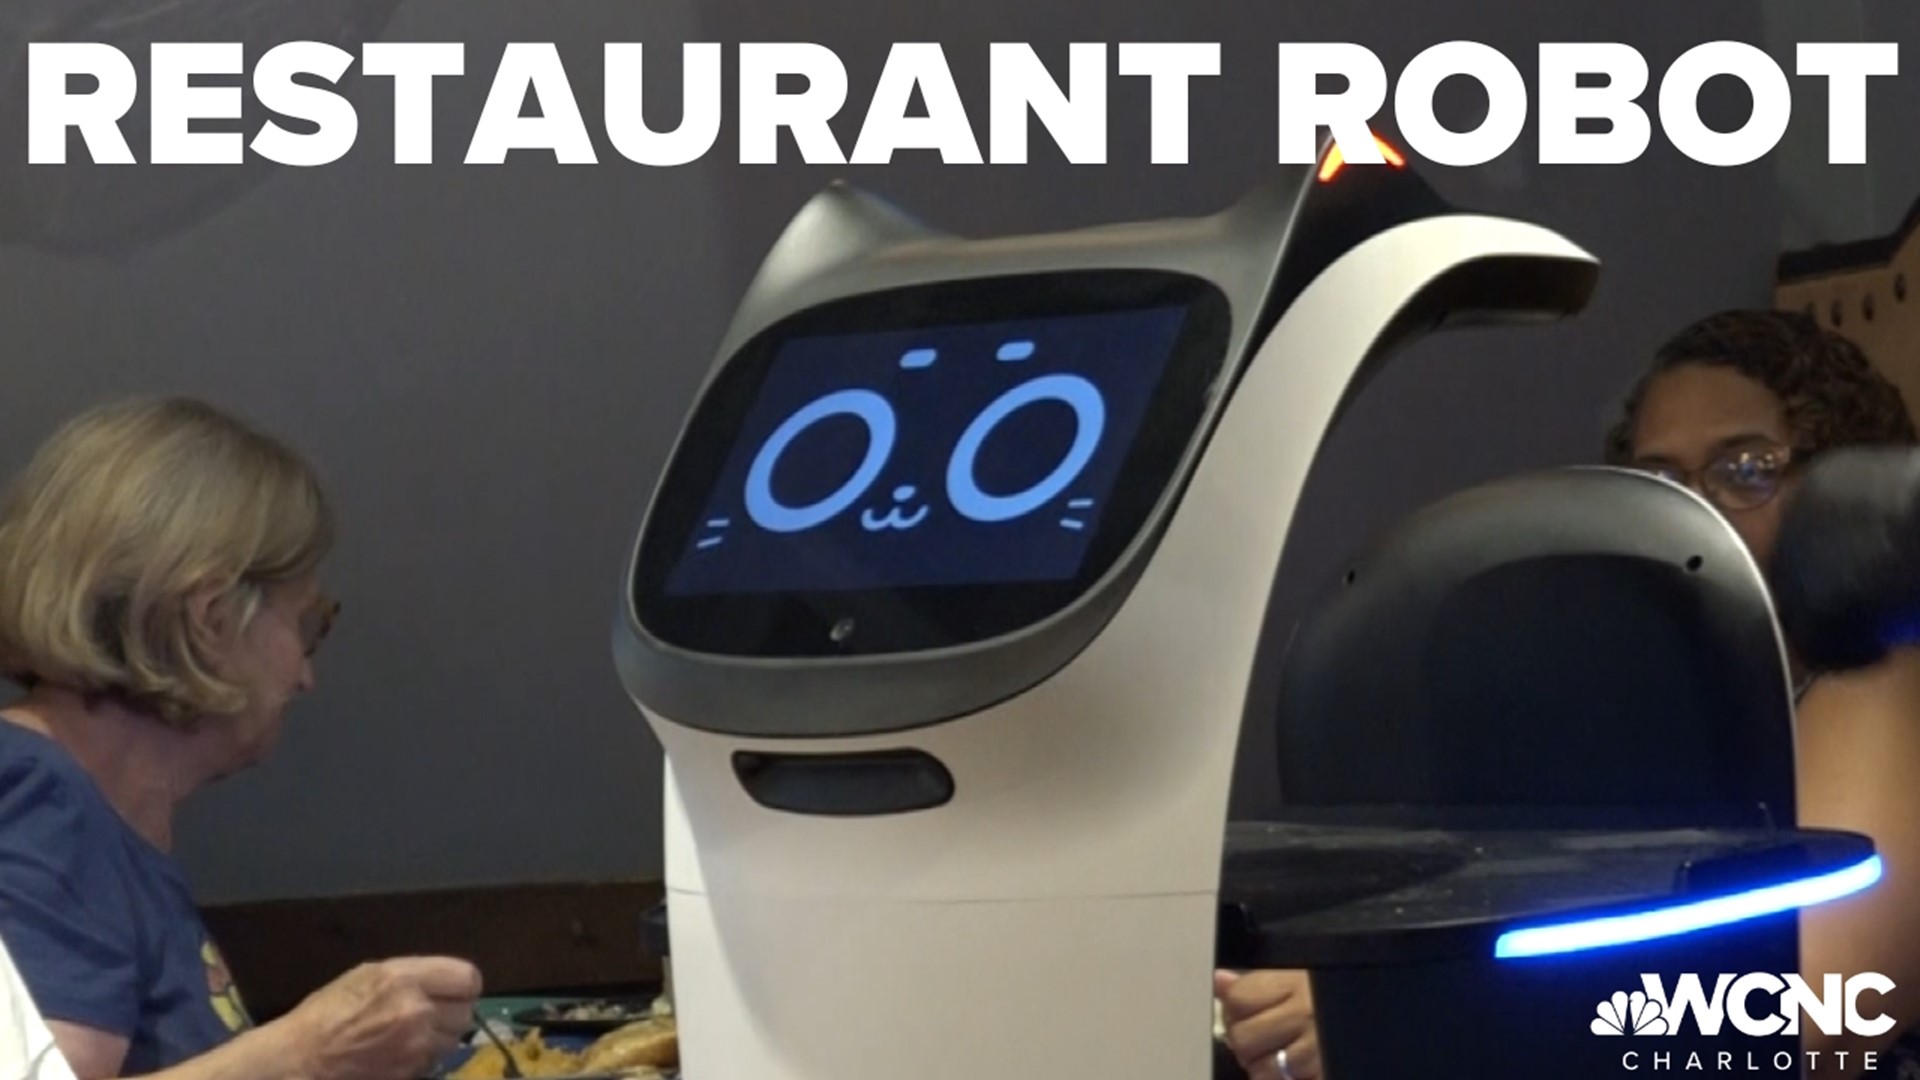 The robot has 360 cameras and with customization knows its way around the restaurant.